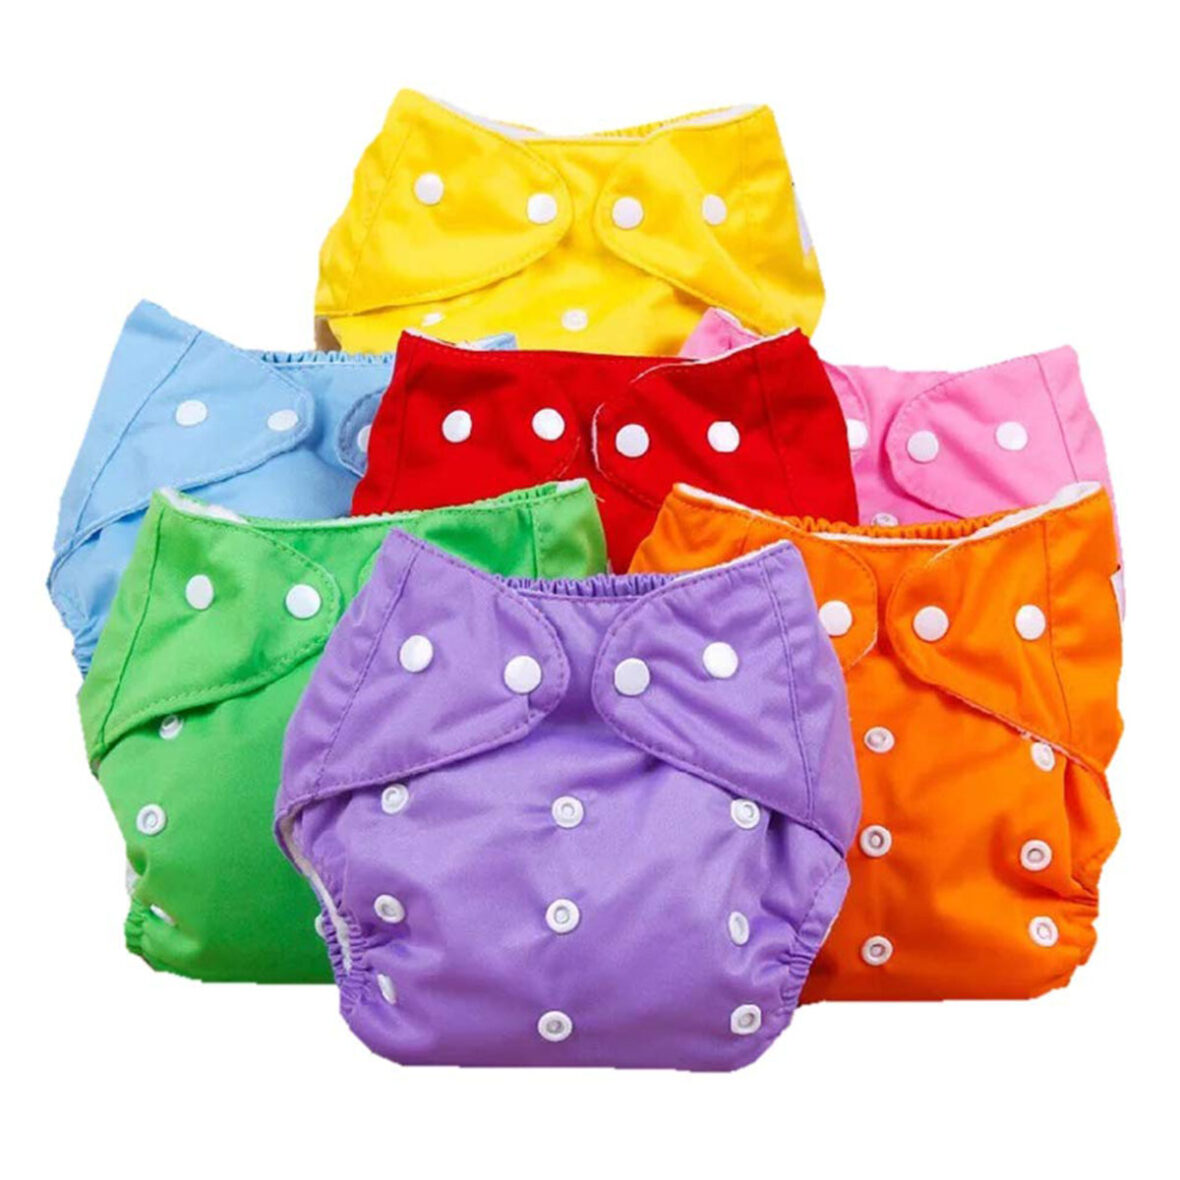 Imported Washable Cloth Diaper